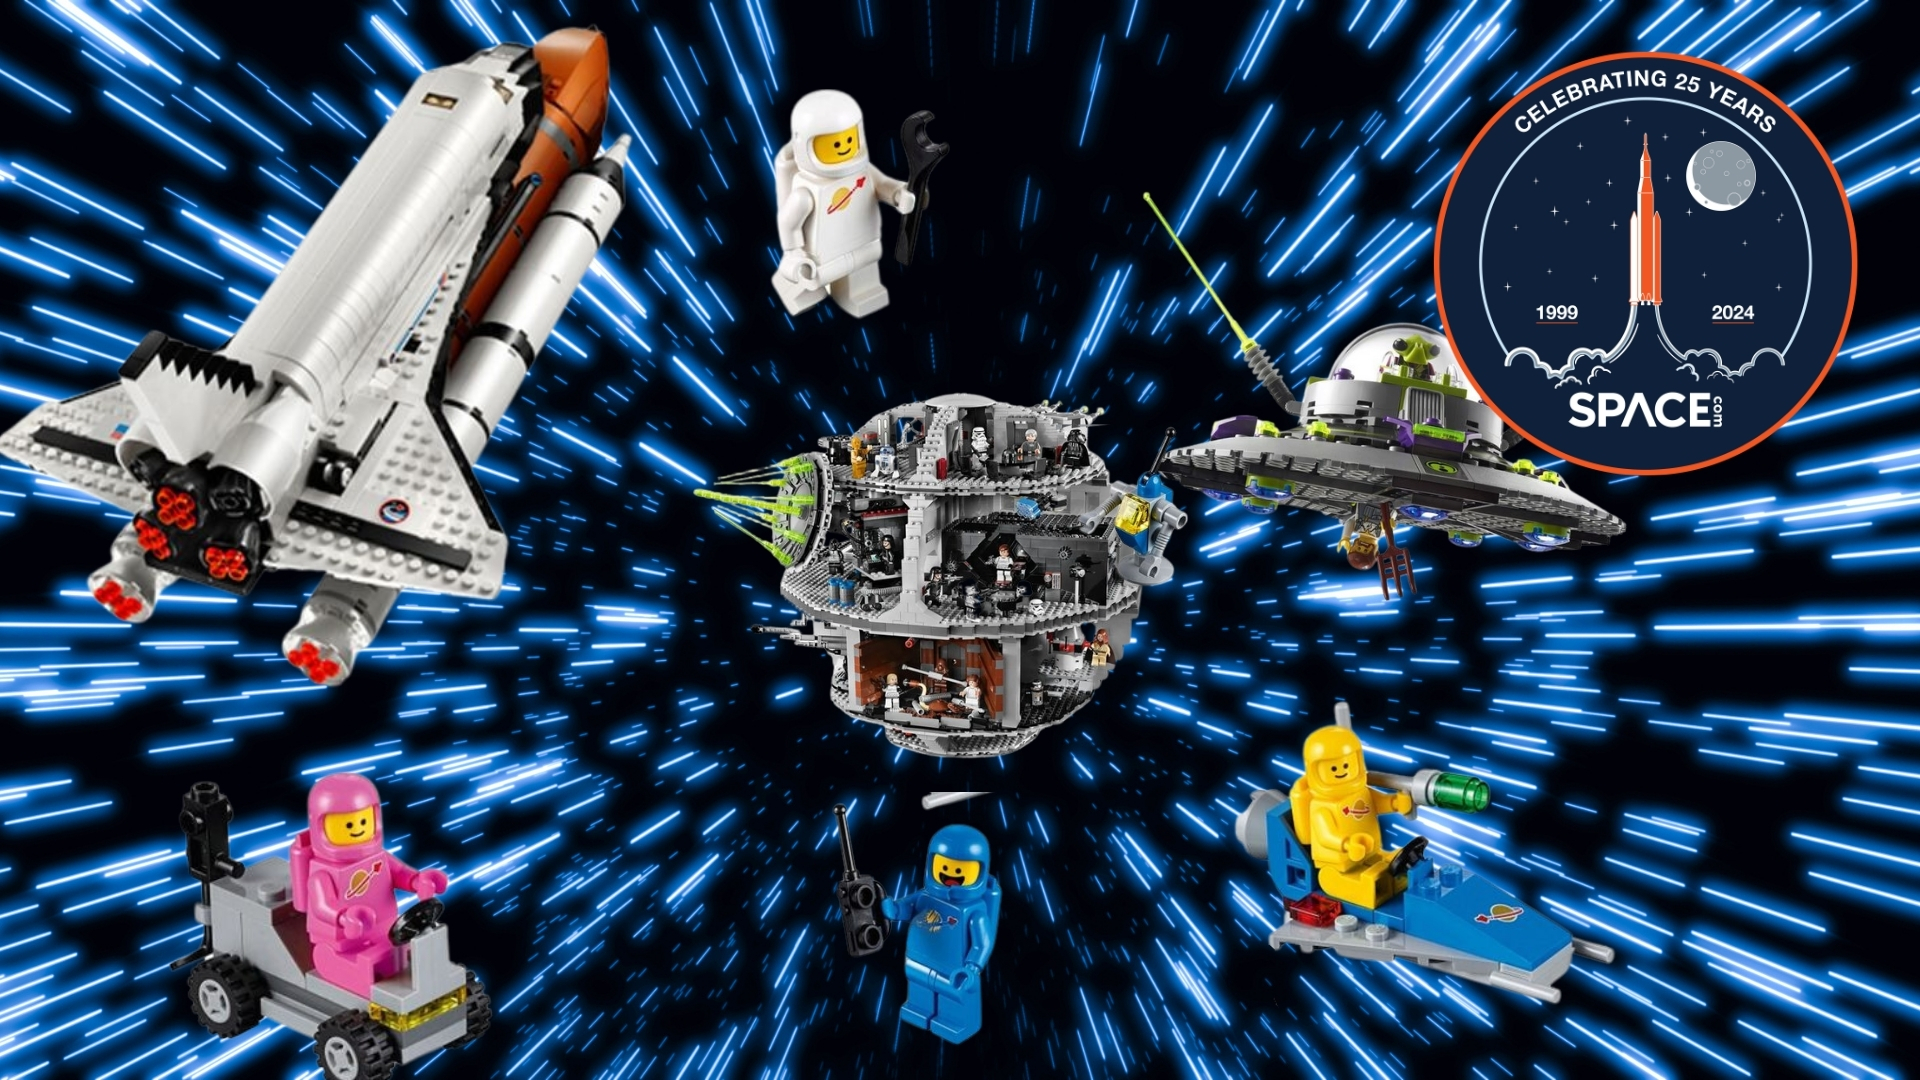  Our favorite Lego space sets from the last 25 years 